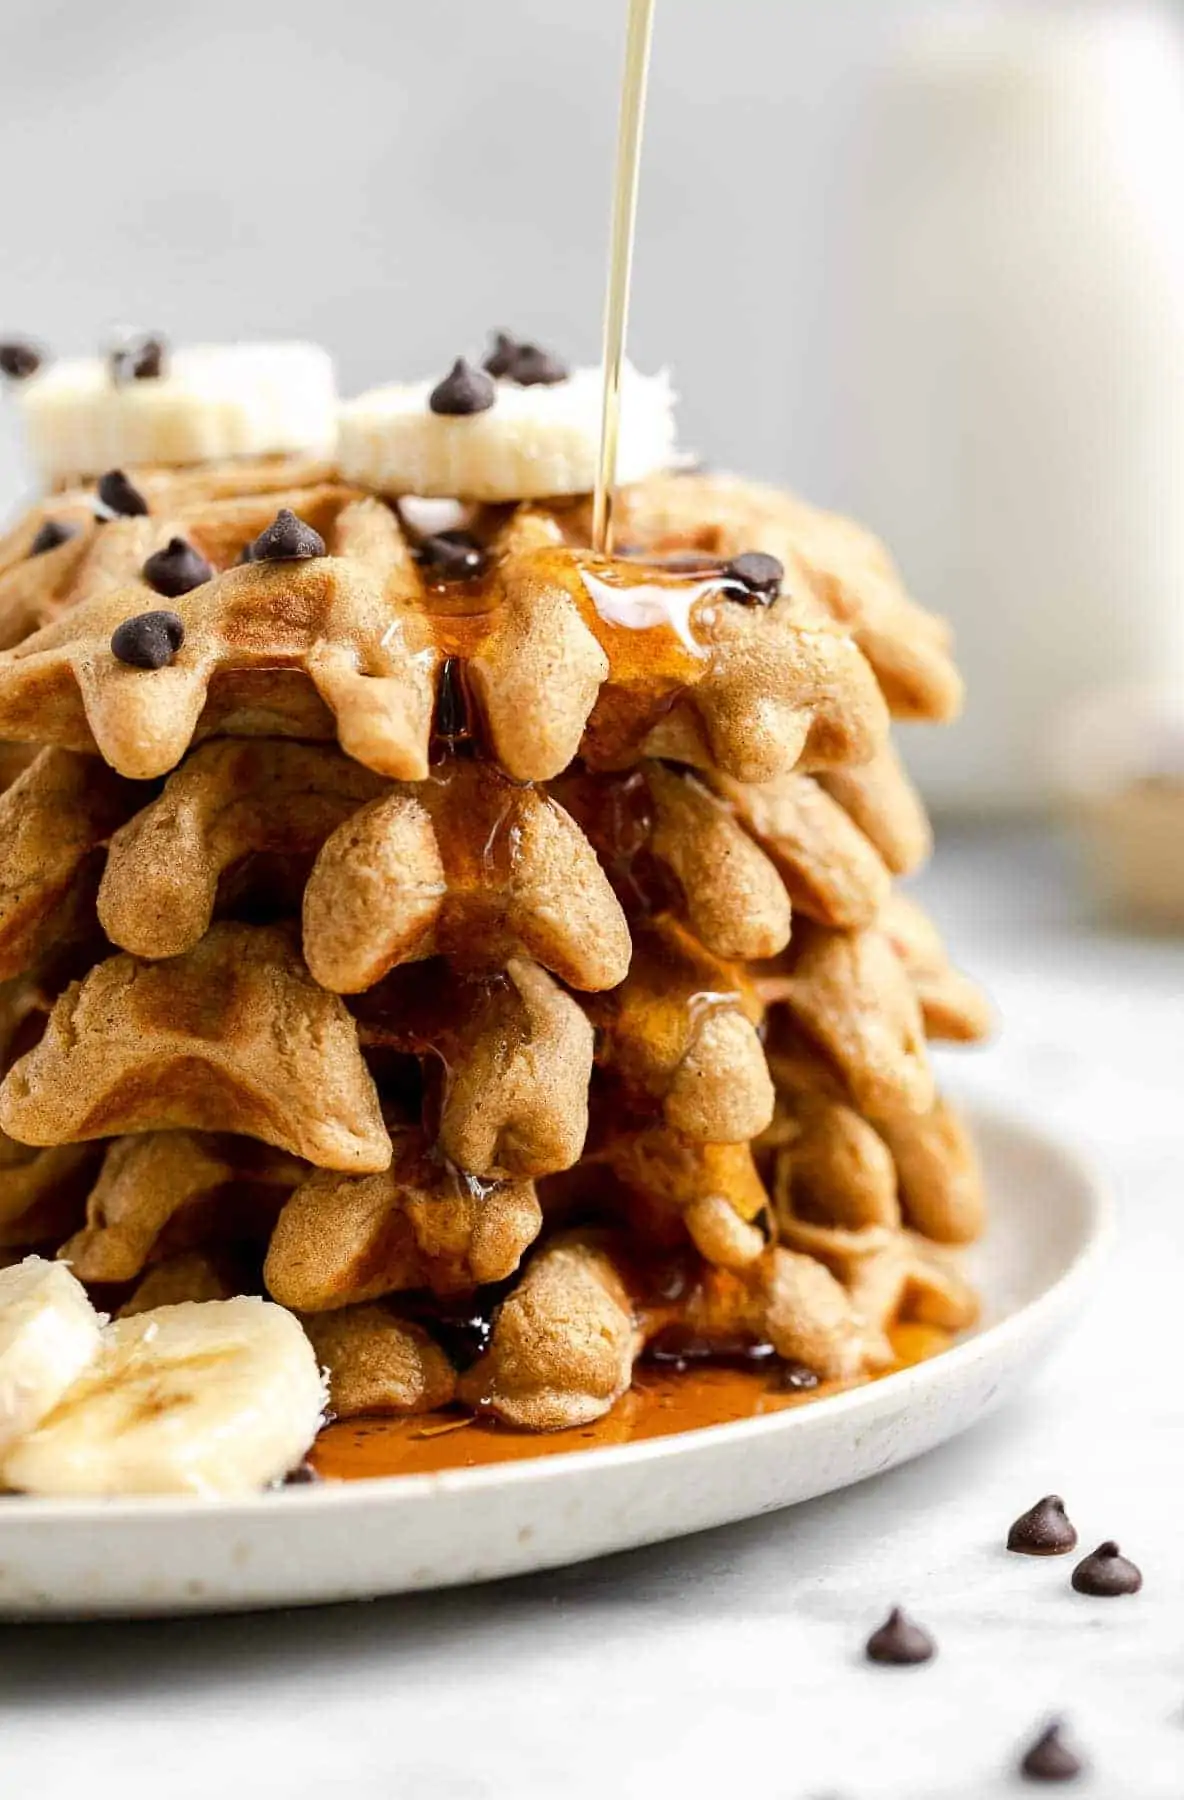 Fives waffles stacked on each other with banana and maple syrup.